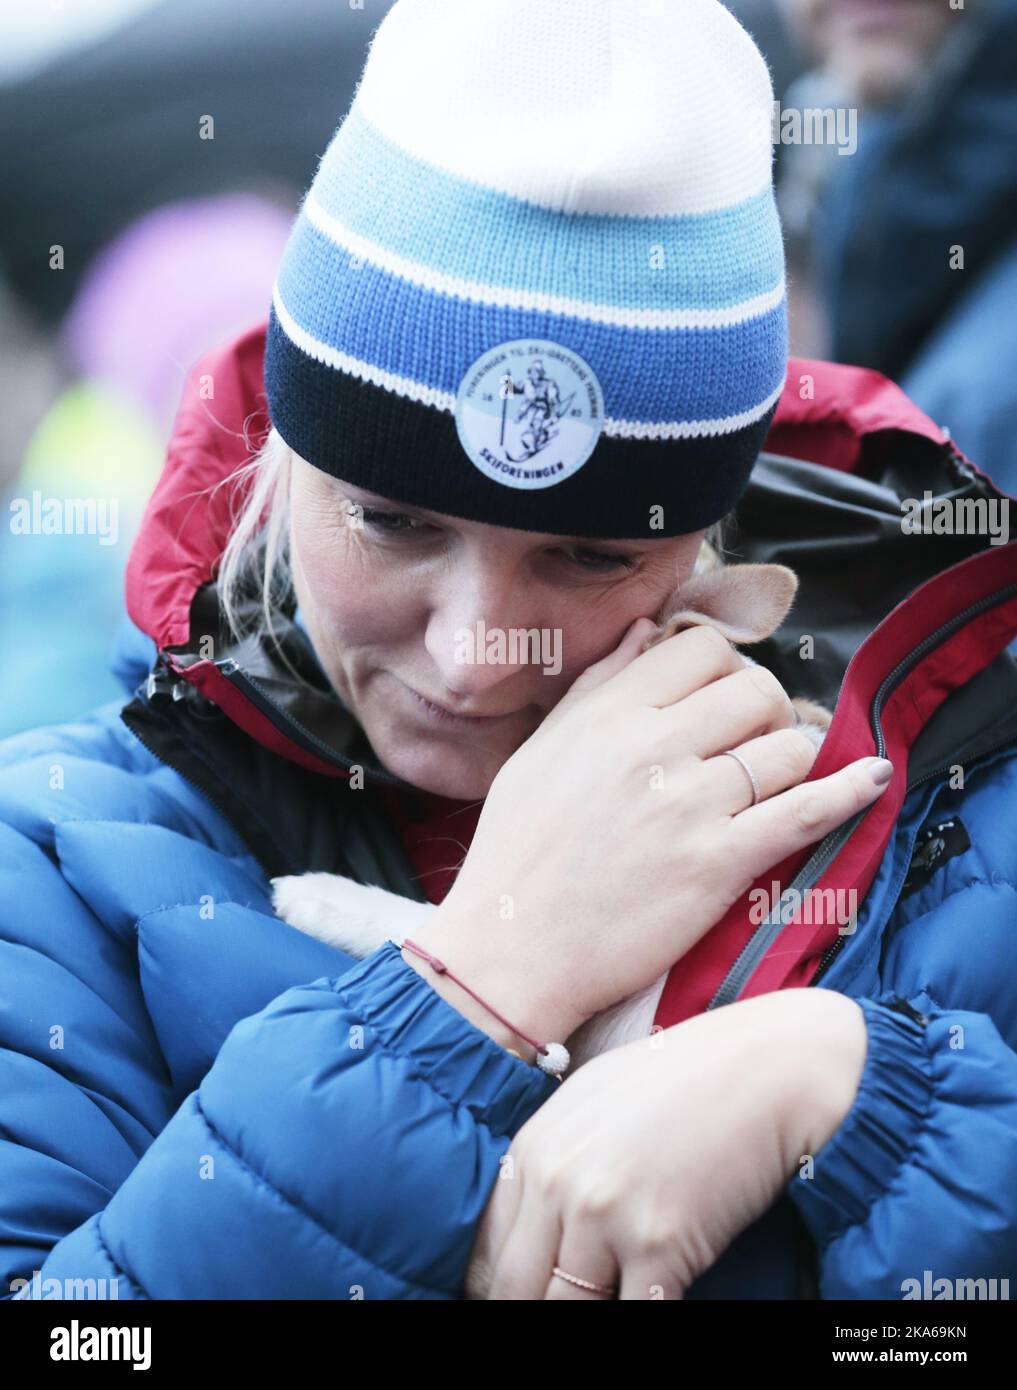 Oslo 20150113. The Royal Crown Prince Couple visit Toyenparken in Oslo on Tuesday for the opening of the Outdoor Recreation Year 2015 (Friluftlivets aar). 1600 children an youth attended the opening. Here puppy 'Toeffen' owned by mayor Fabian Stang receives the royal touch of the Crown Princess Mette-Marit. Photo: Lise Aaserud / NTB scanpix  Stock Photo